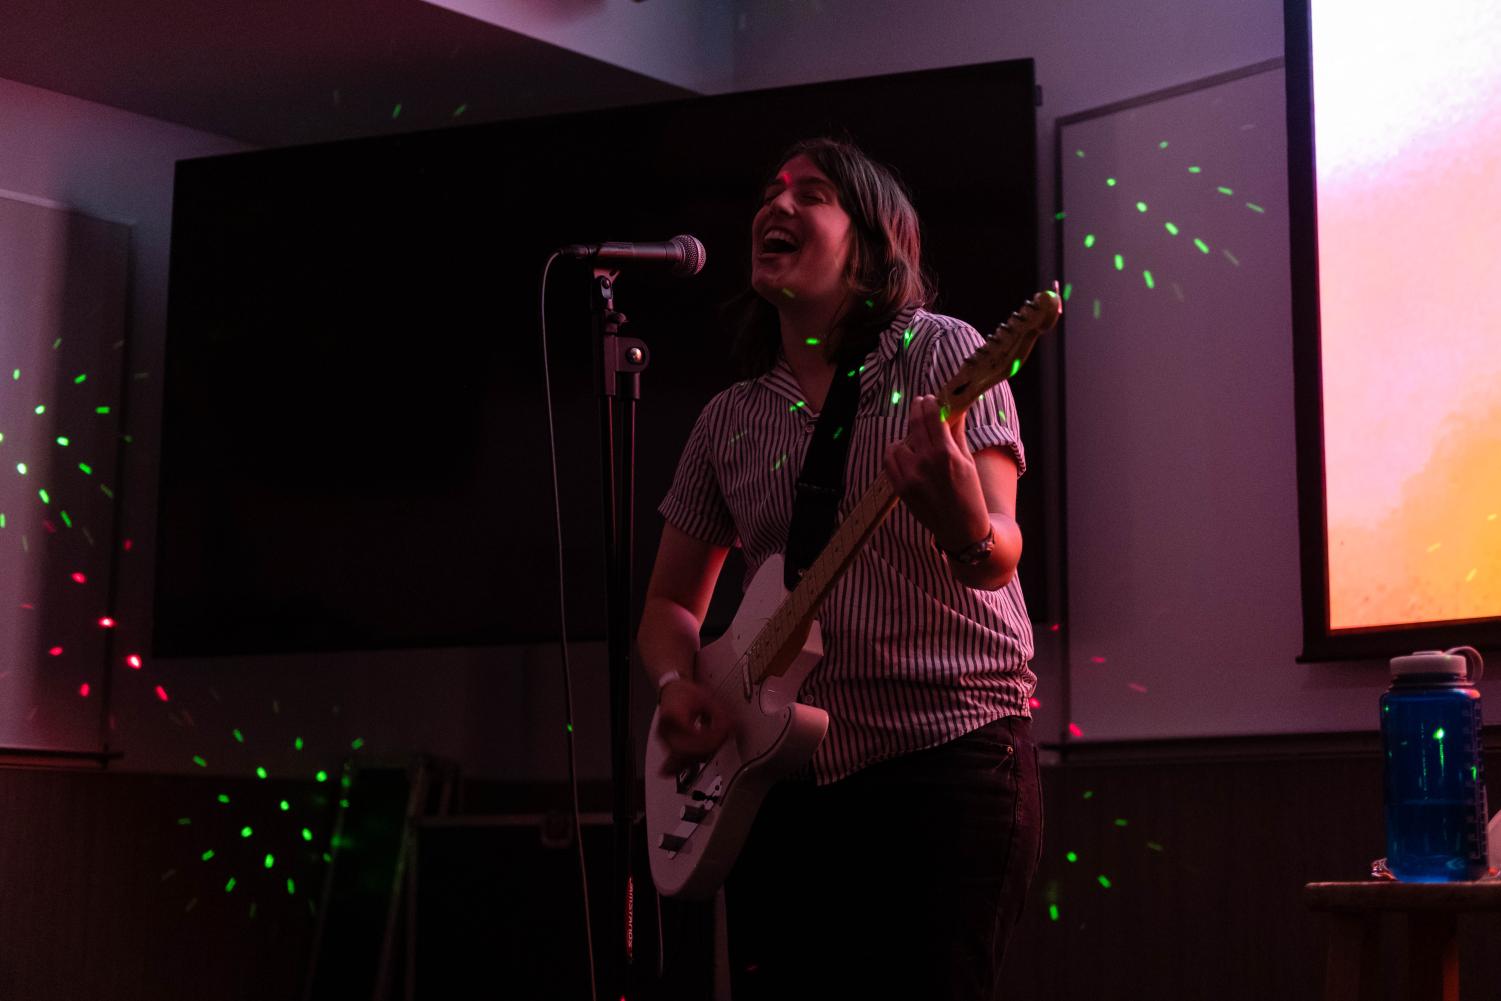 A performer plays an electric guitar and sings into a microphone in a dimly lit room. They wear a striped shirt and green dotted lights shine around them.